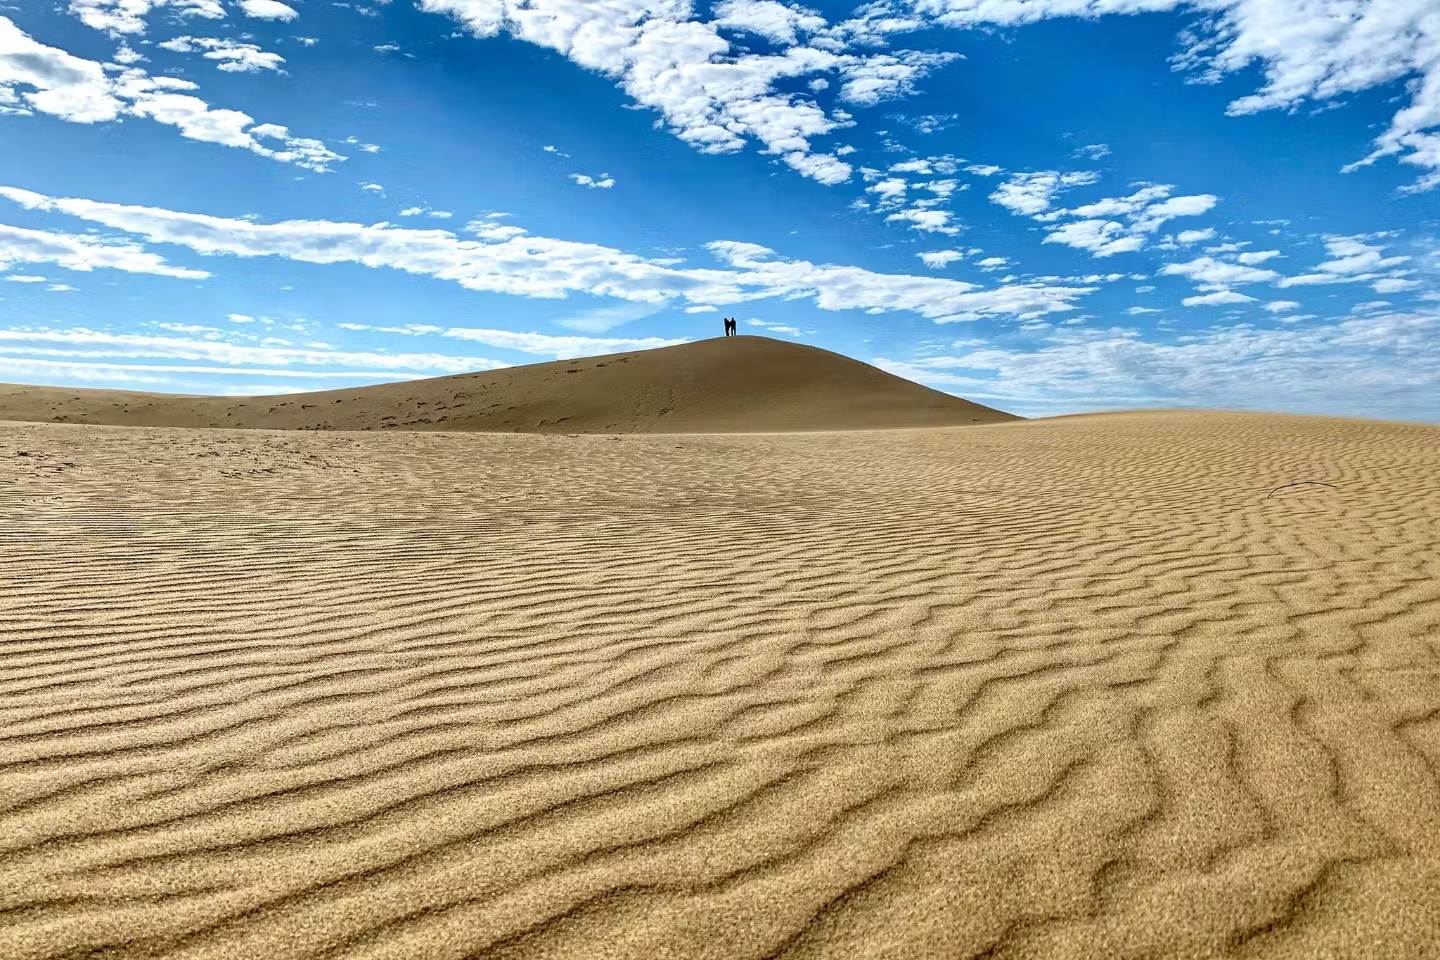 The contrast between the blue skies and the brown sand is stunning.